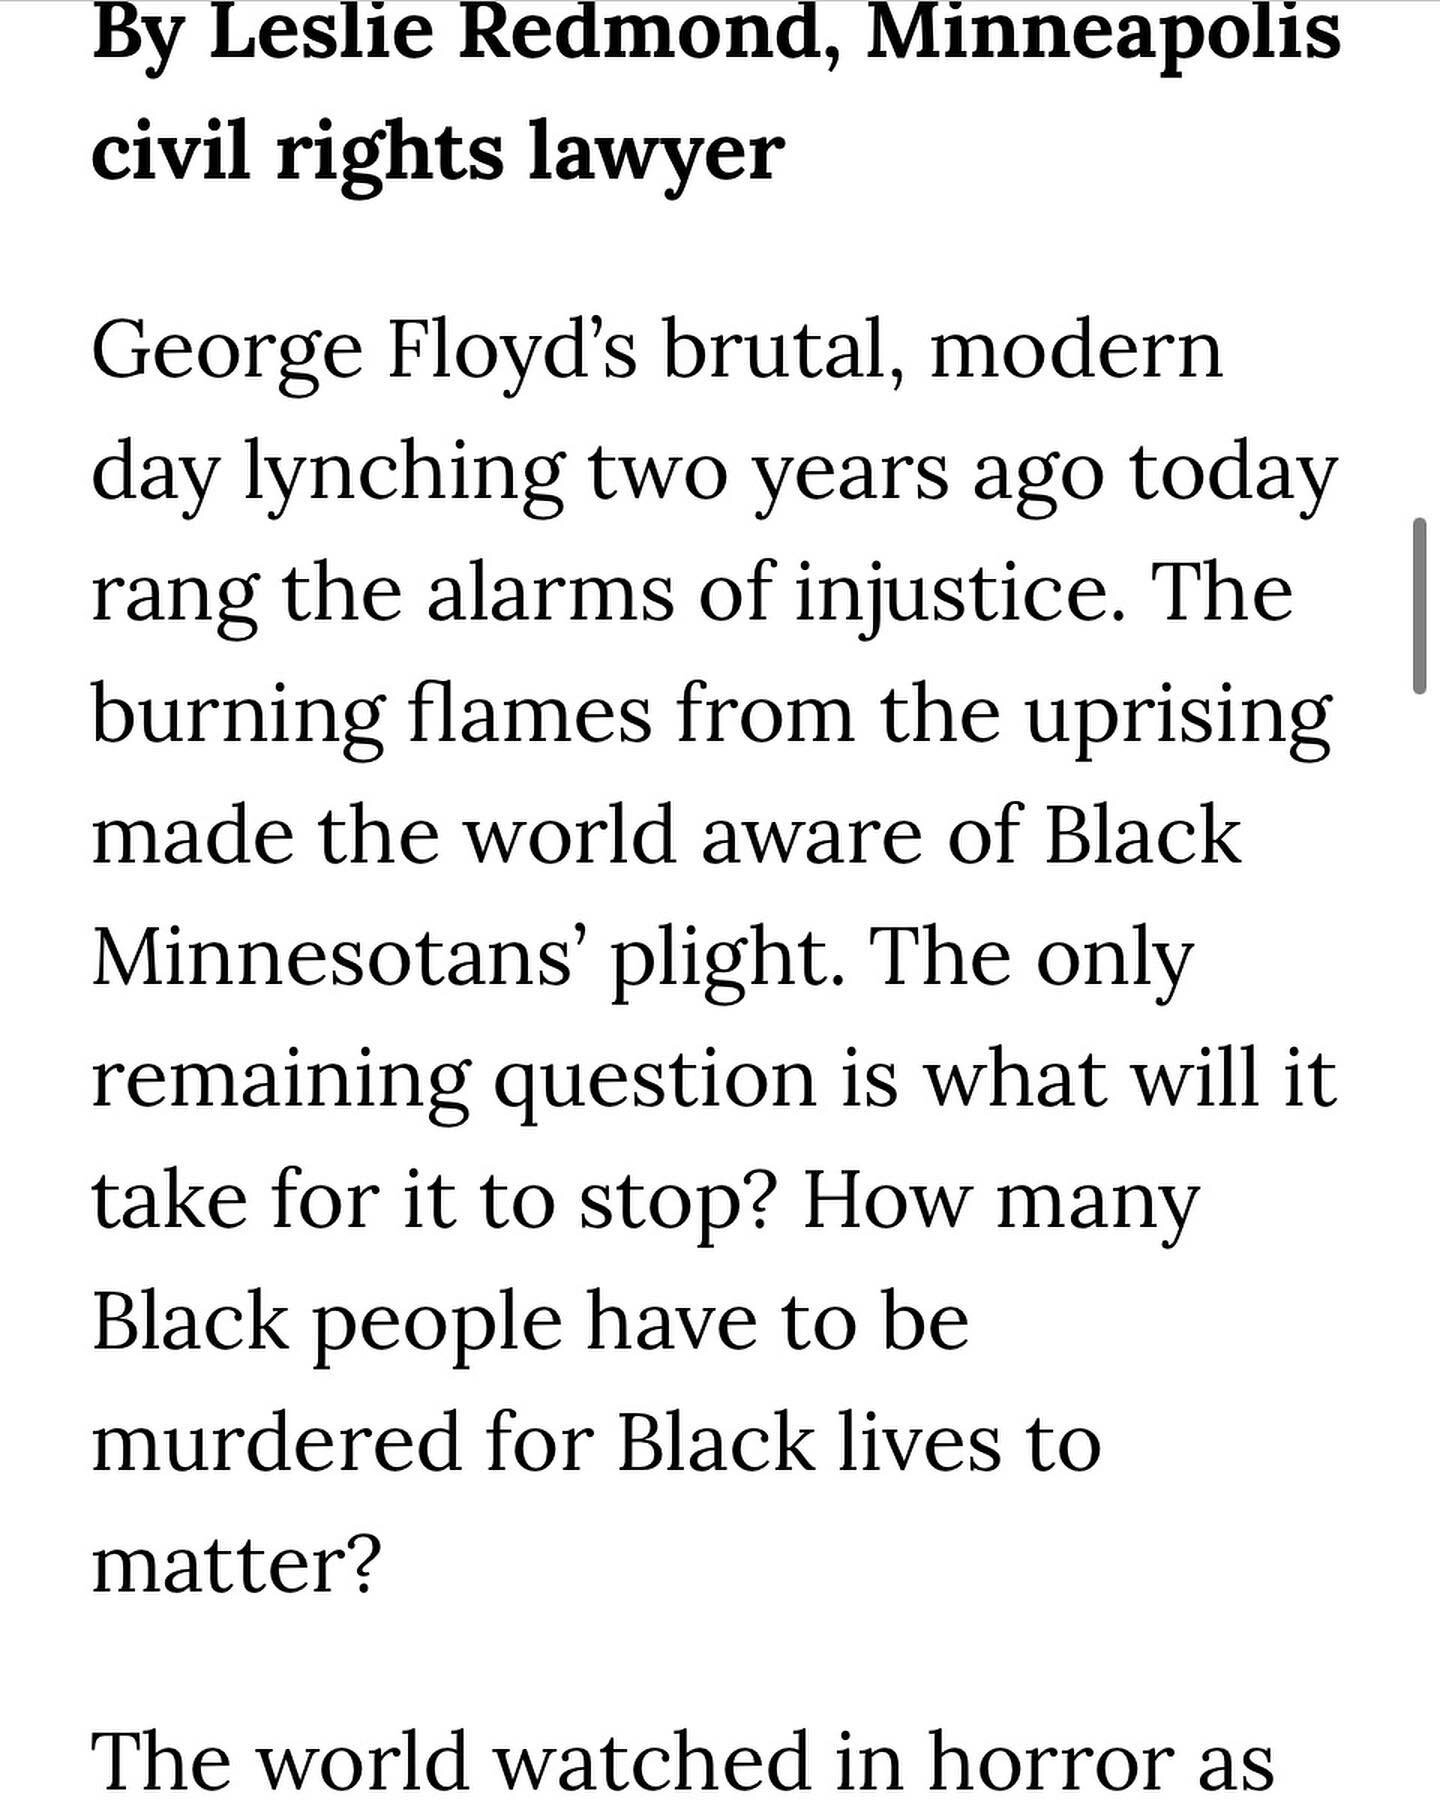 Two years later #GeorgeFloyd Please read my article. Link in my bio

&ldquo;George Floyd&rsquo;s brutal, modern day lynching two years ago today rang the alarms of injustice. The burning flames from the uprising made the world aware of Black Minnesot